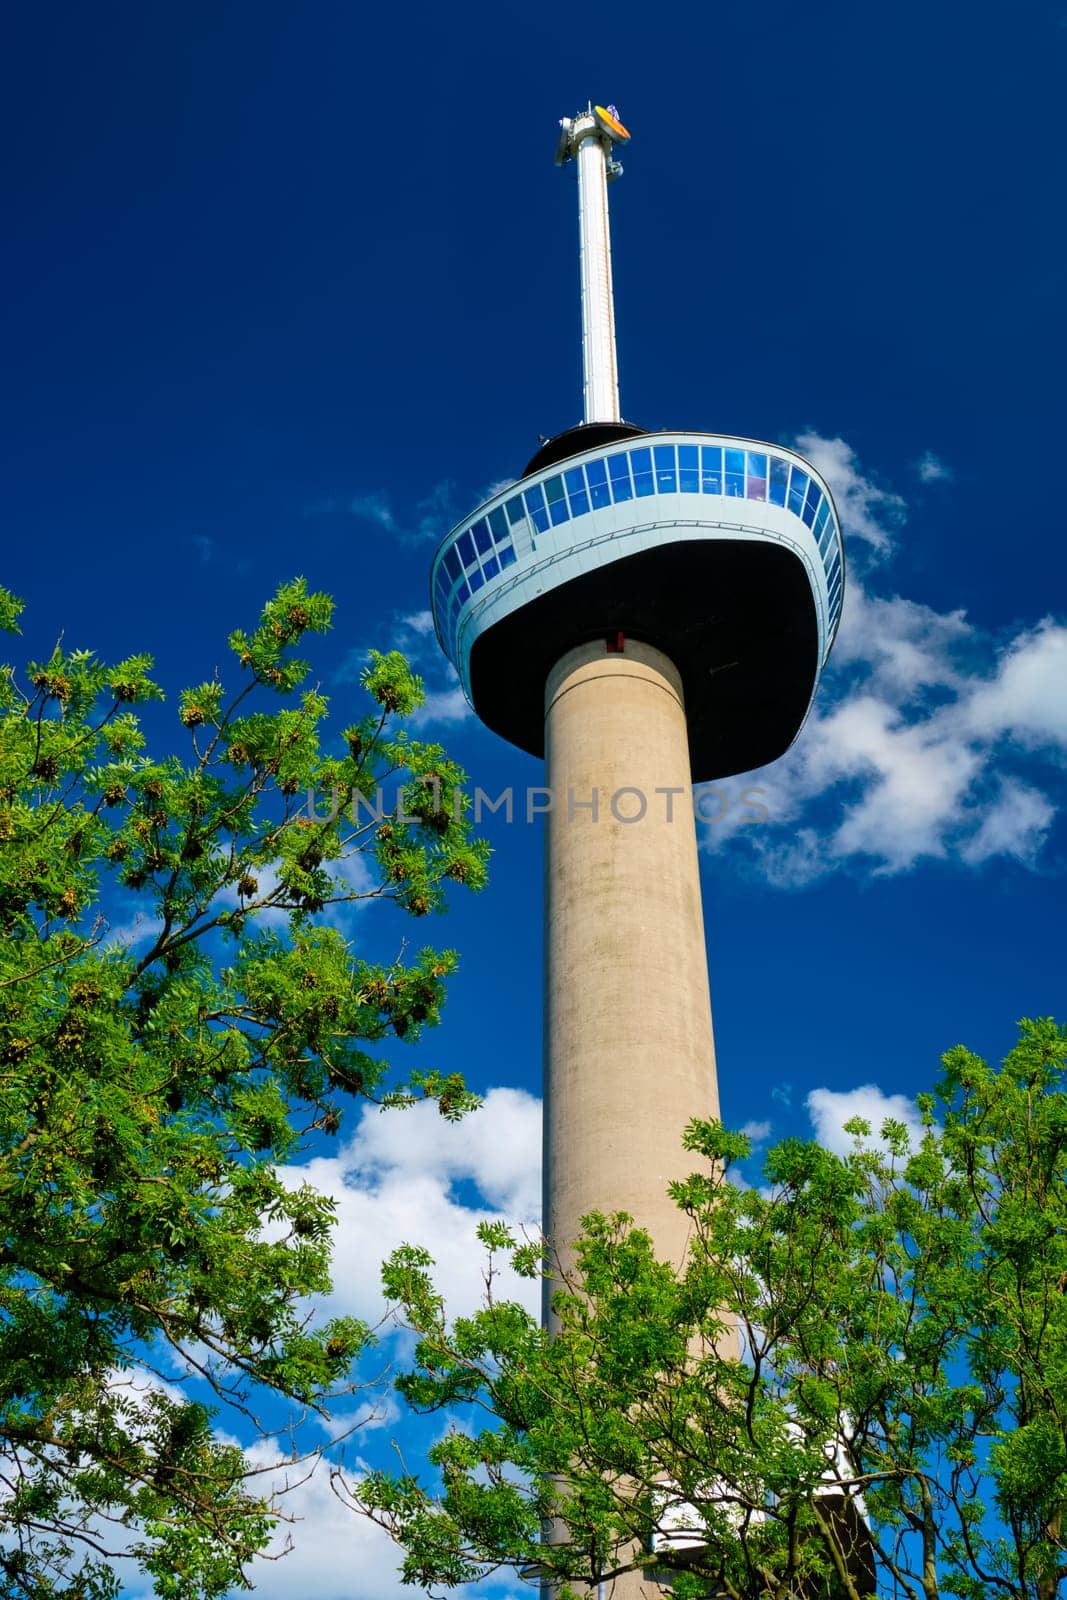 Euromast is observation tower in Rotterdam, Netherlands by dimol